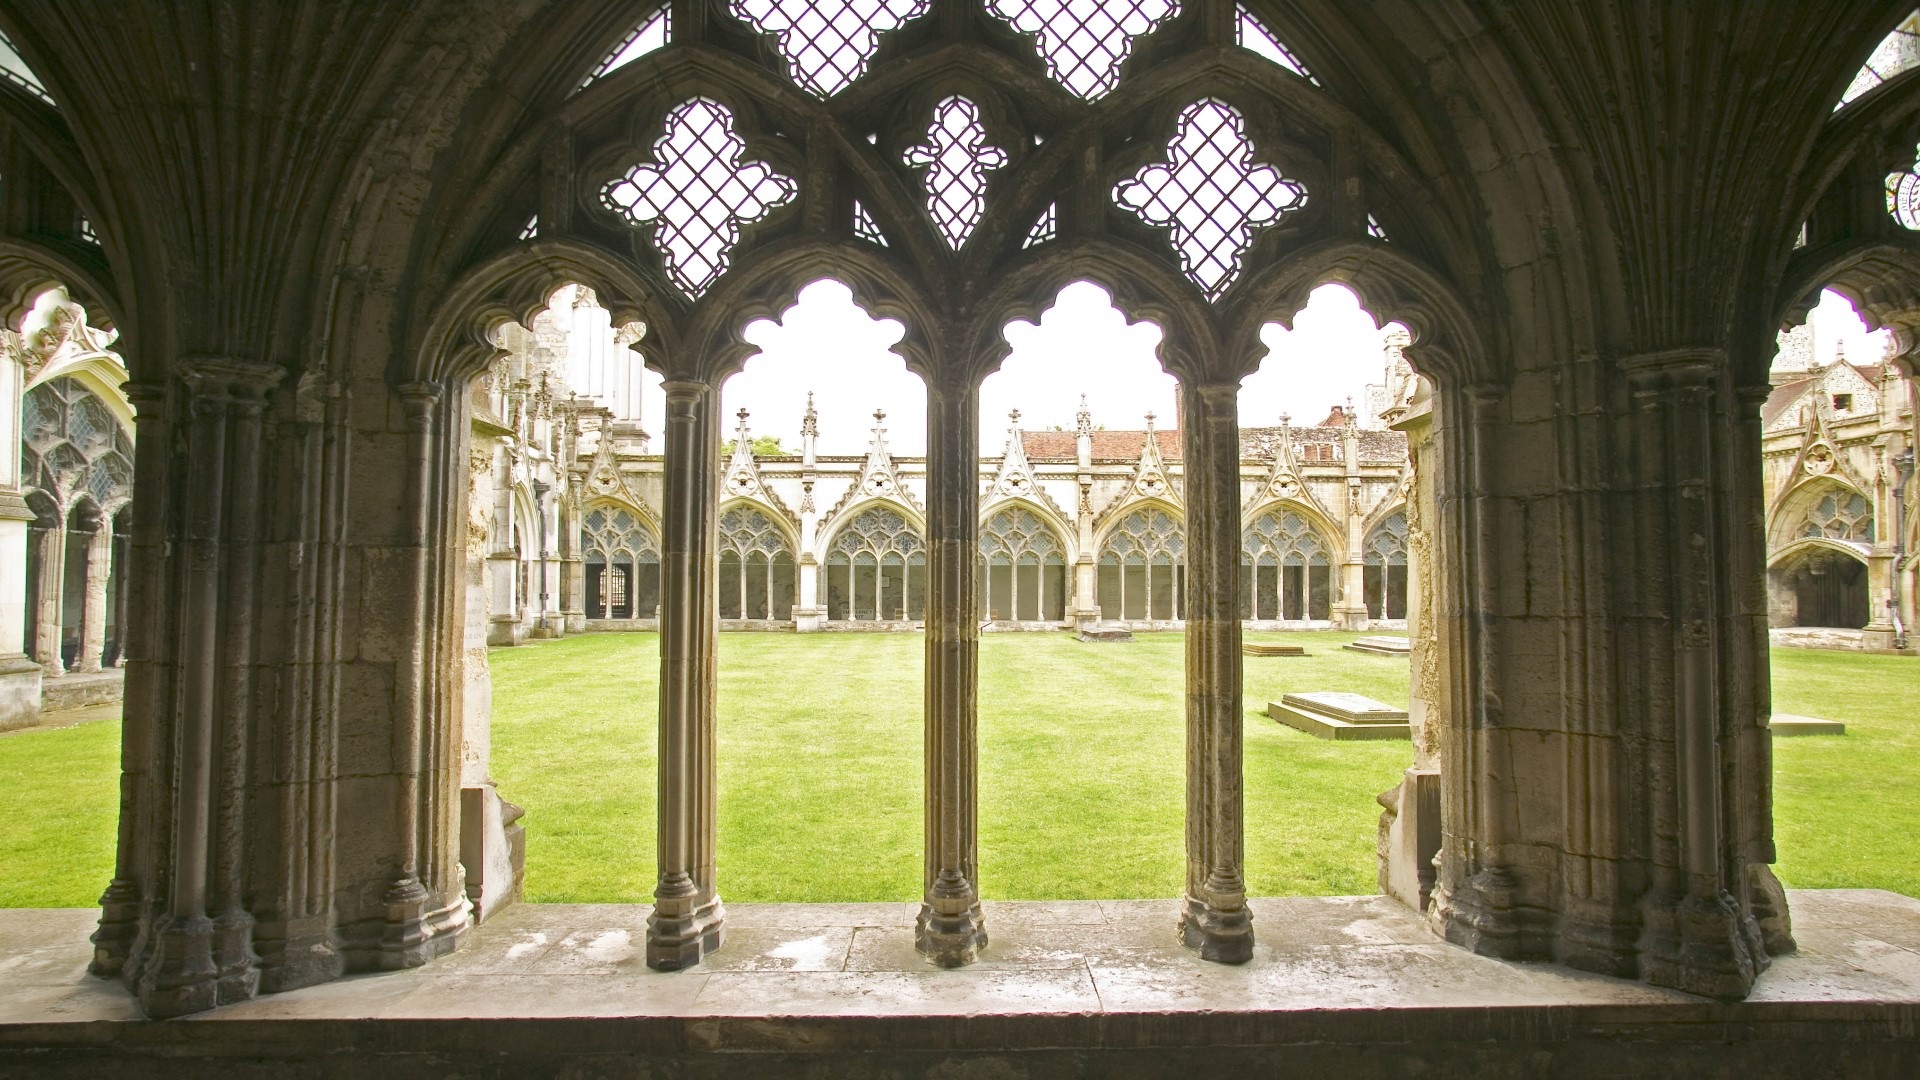 Canterbury Cathedral Cloisters